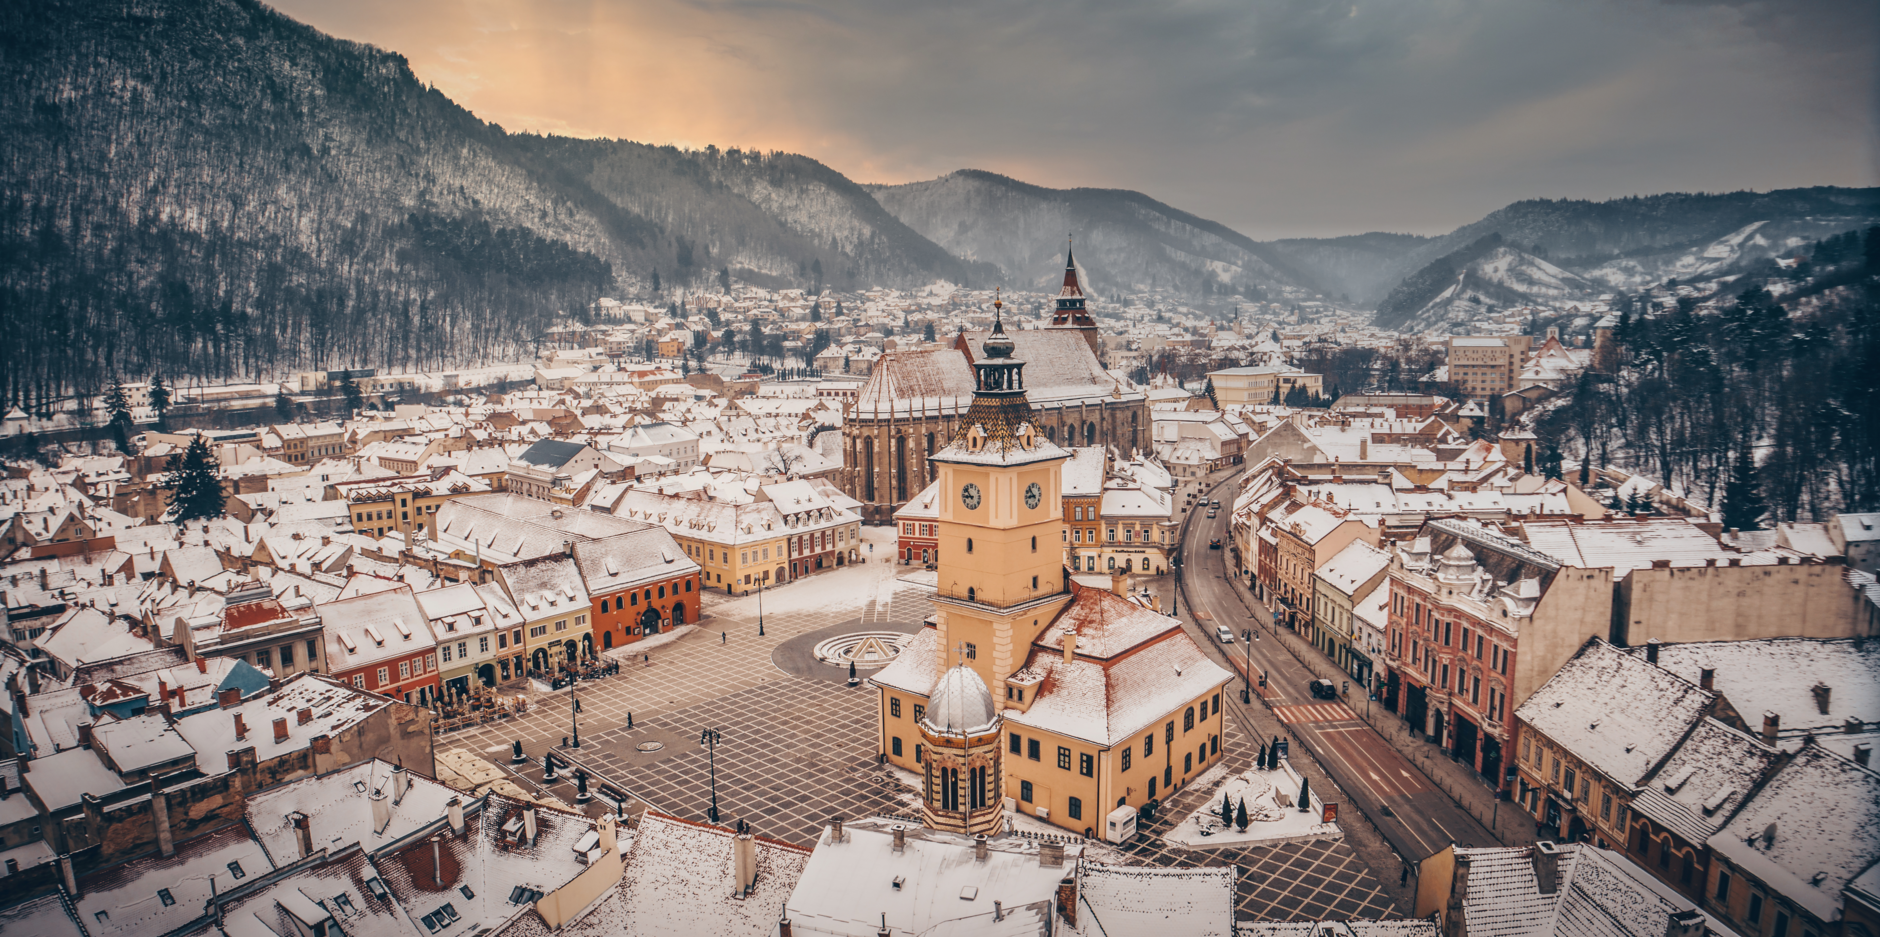 View over the Town Brasov in Romania, which is located in the middle of hills, in Winter